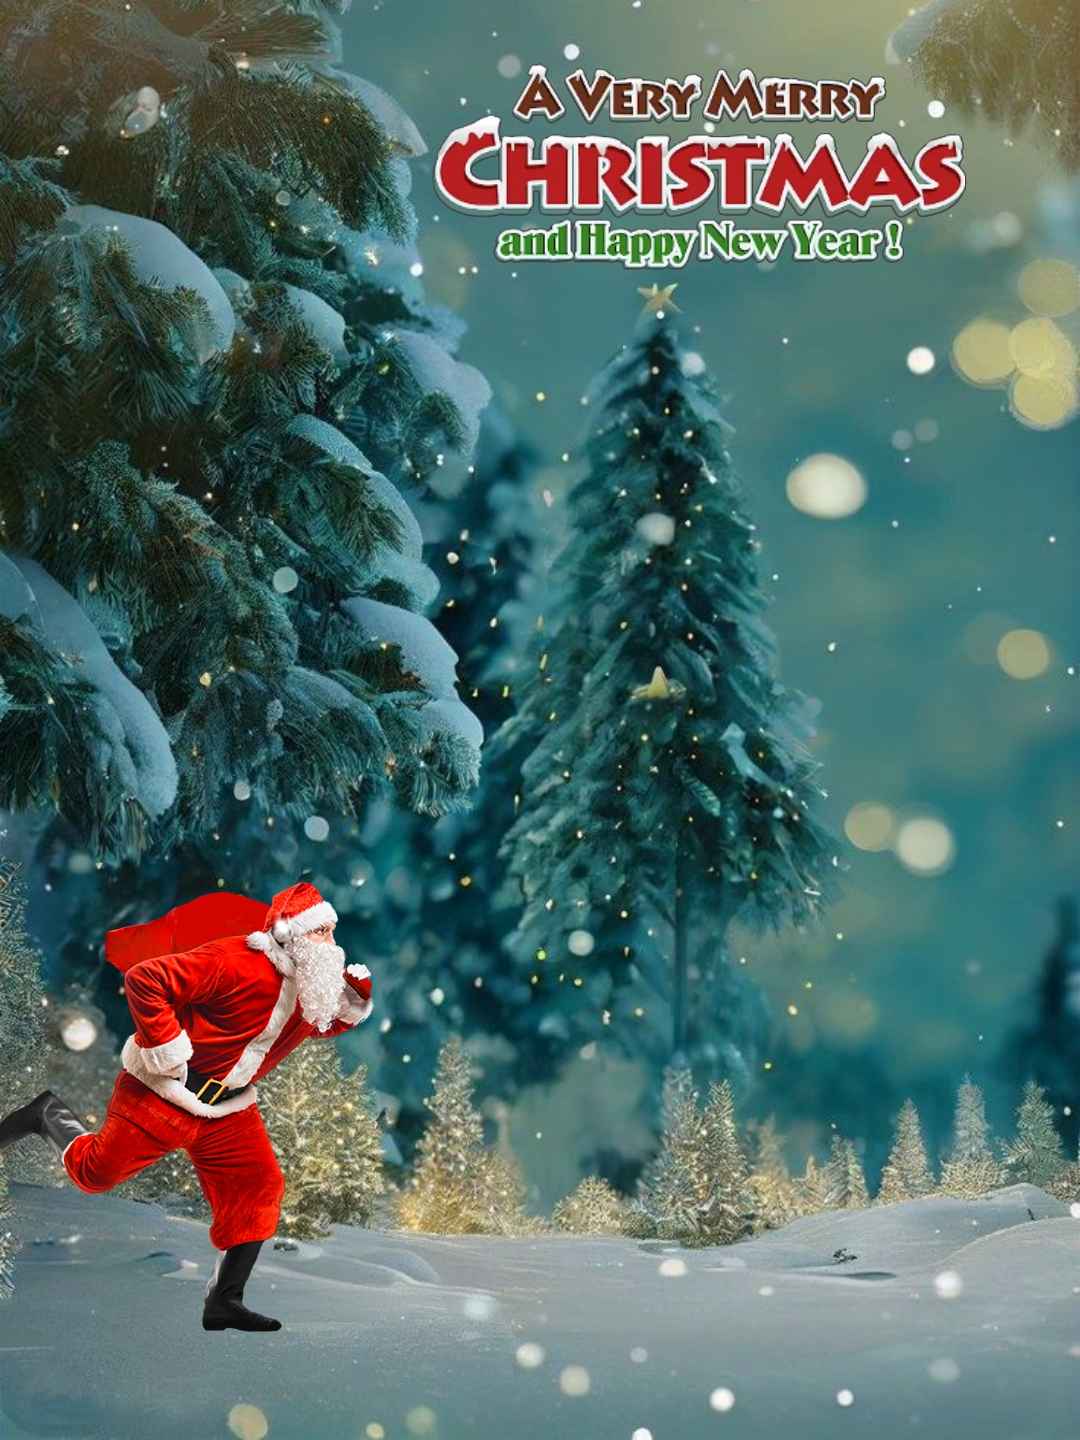 Merry Christmas Photo Editing Background Hd